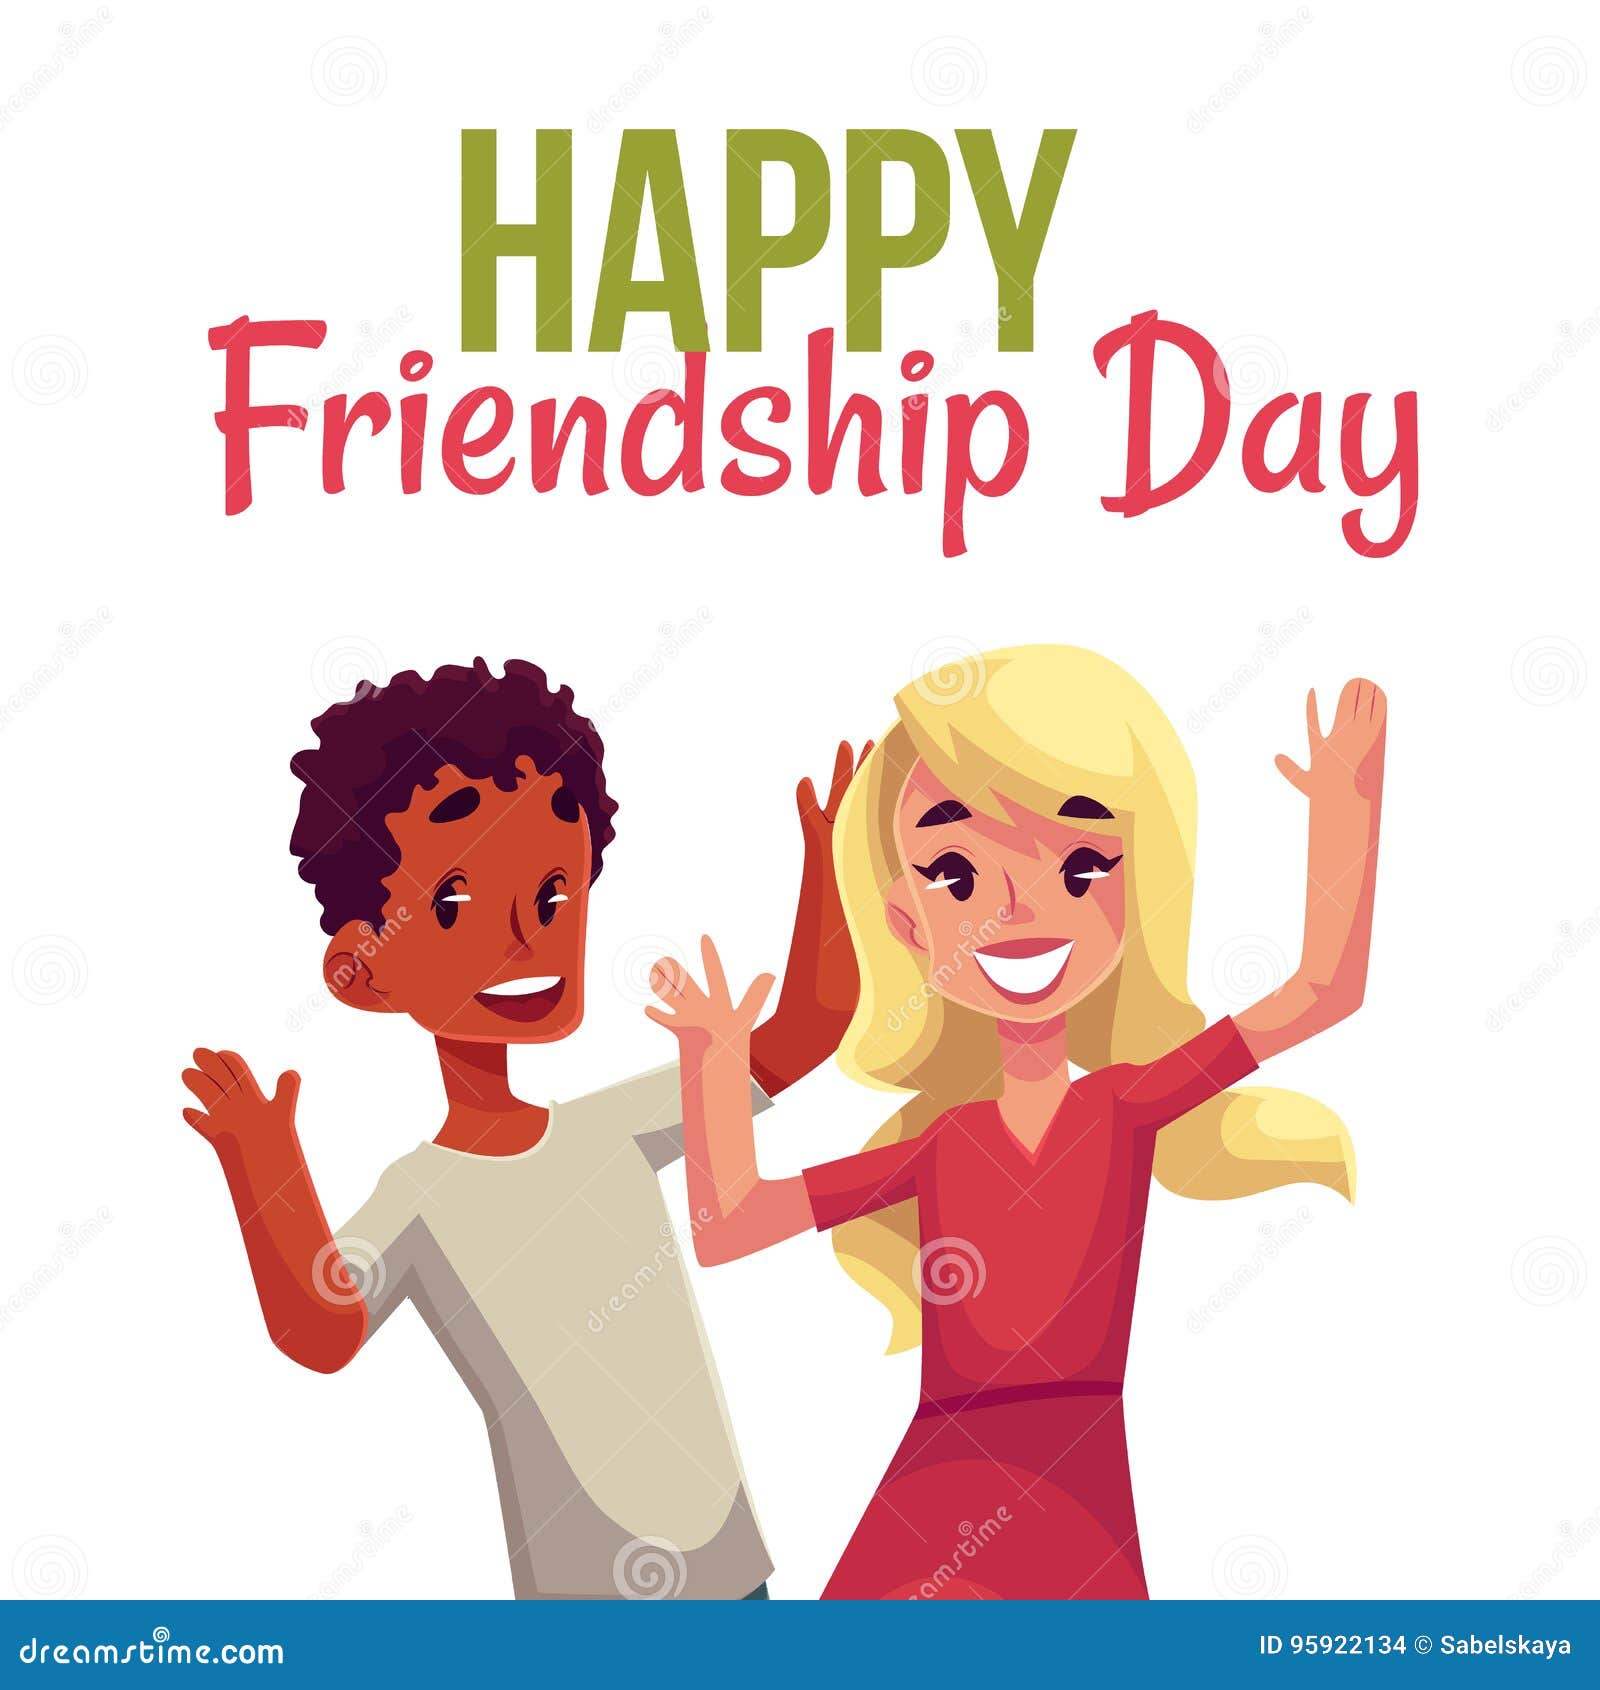 Happy Friendship Day Greeting Card Stock Vector - Illustration of ...